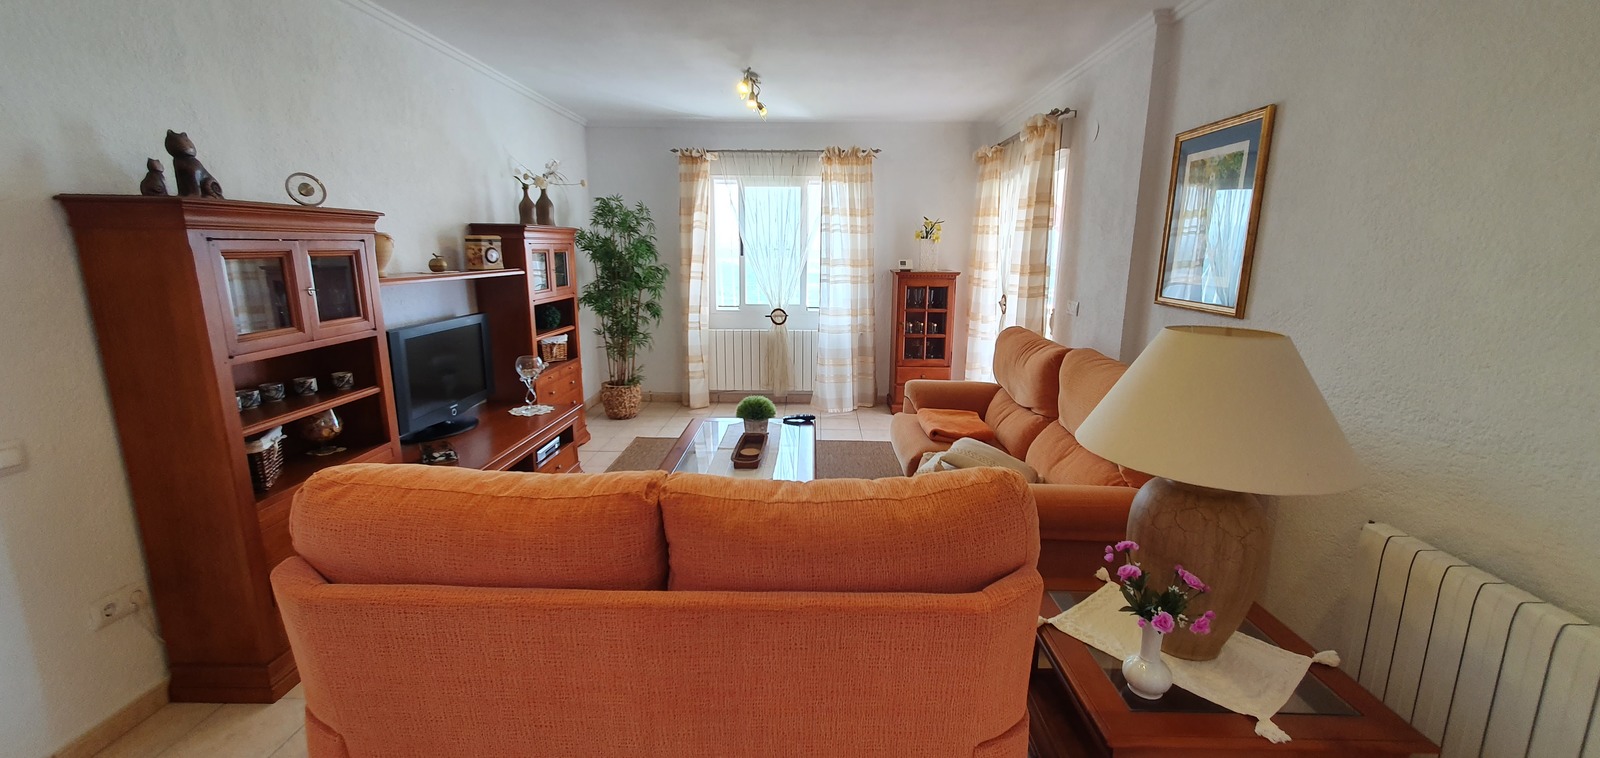 Very well maintained 2 bedroom villa, with 2 living units in a fantastic panoramic location in Oliva